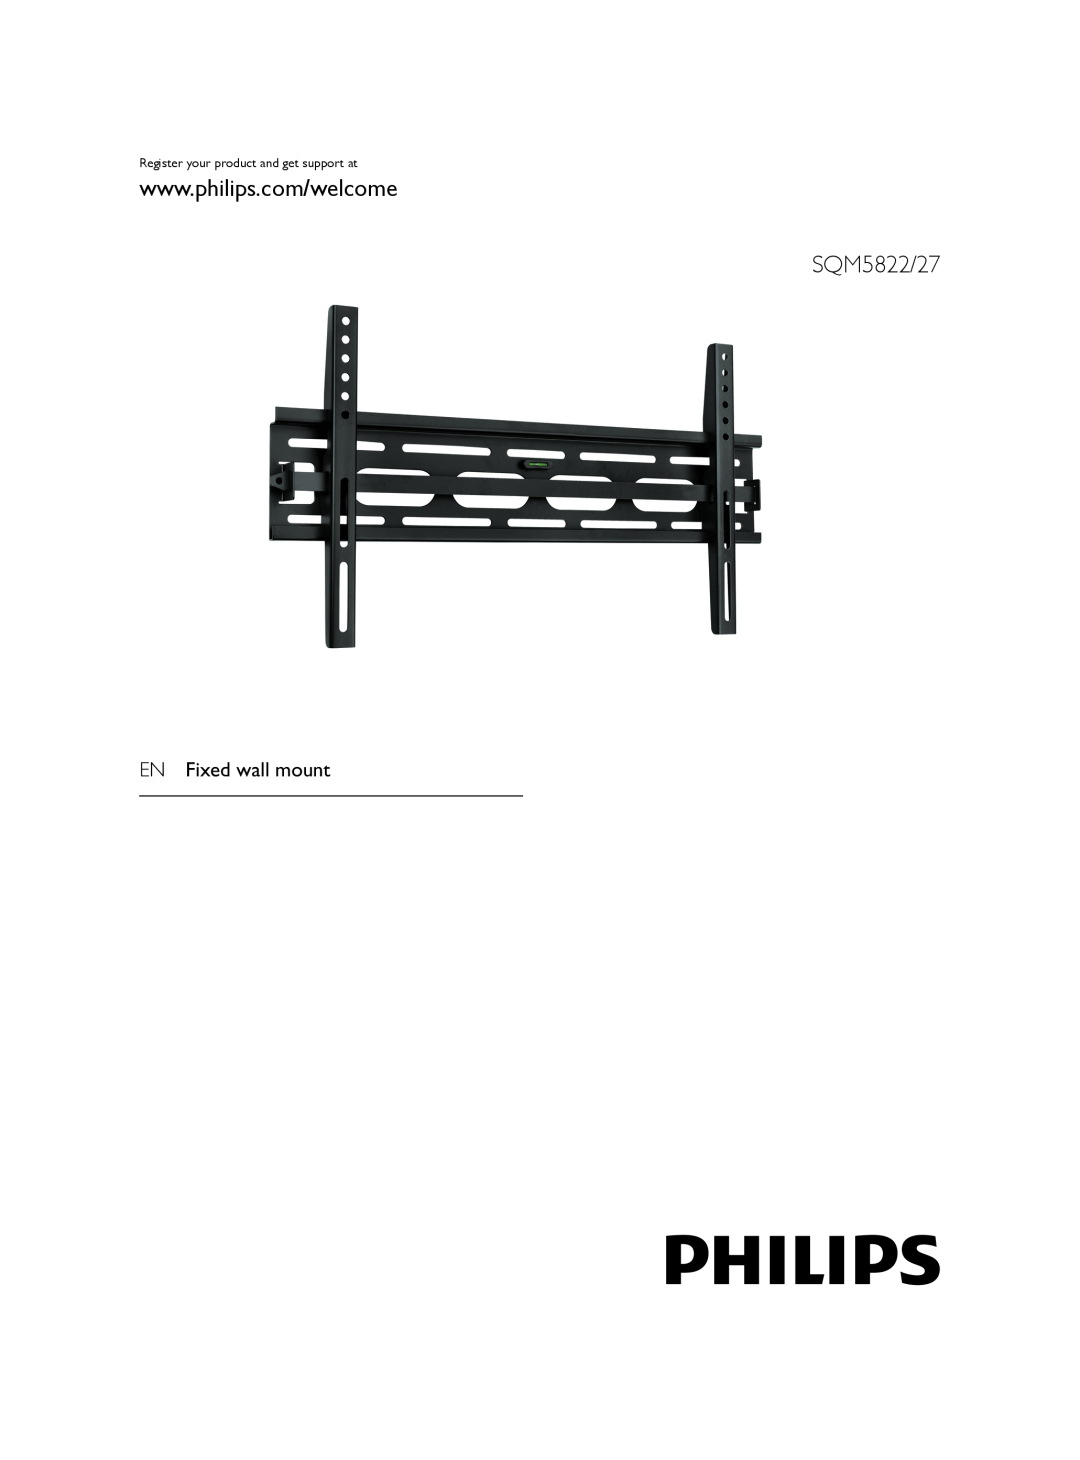 Philips manual SQM5822/27, EN Fixed wall mount, Register your product and get support at 